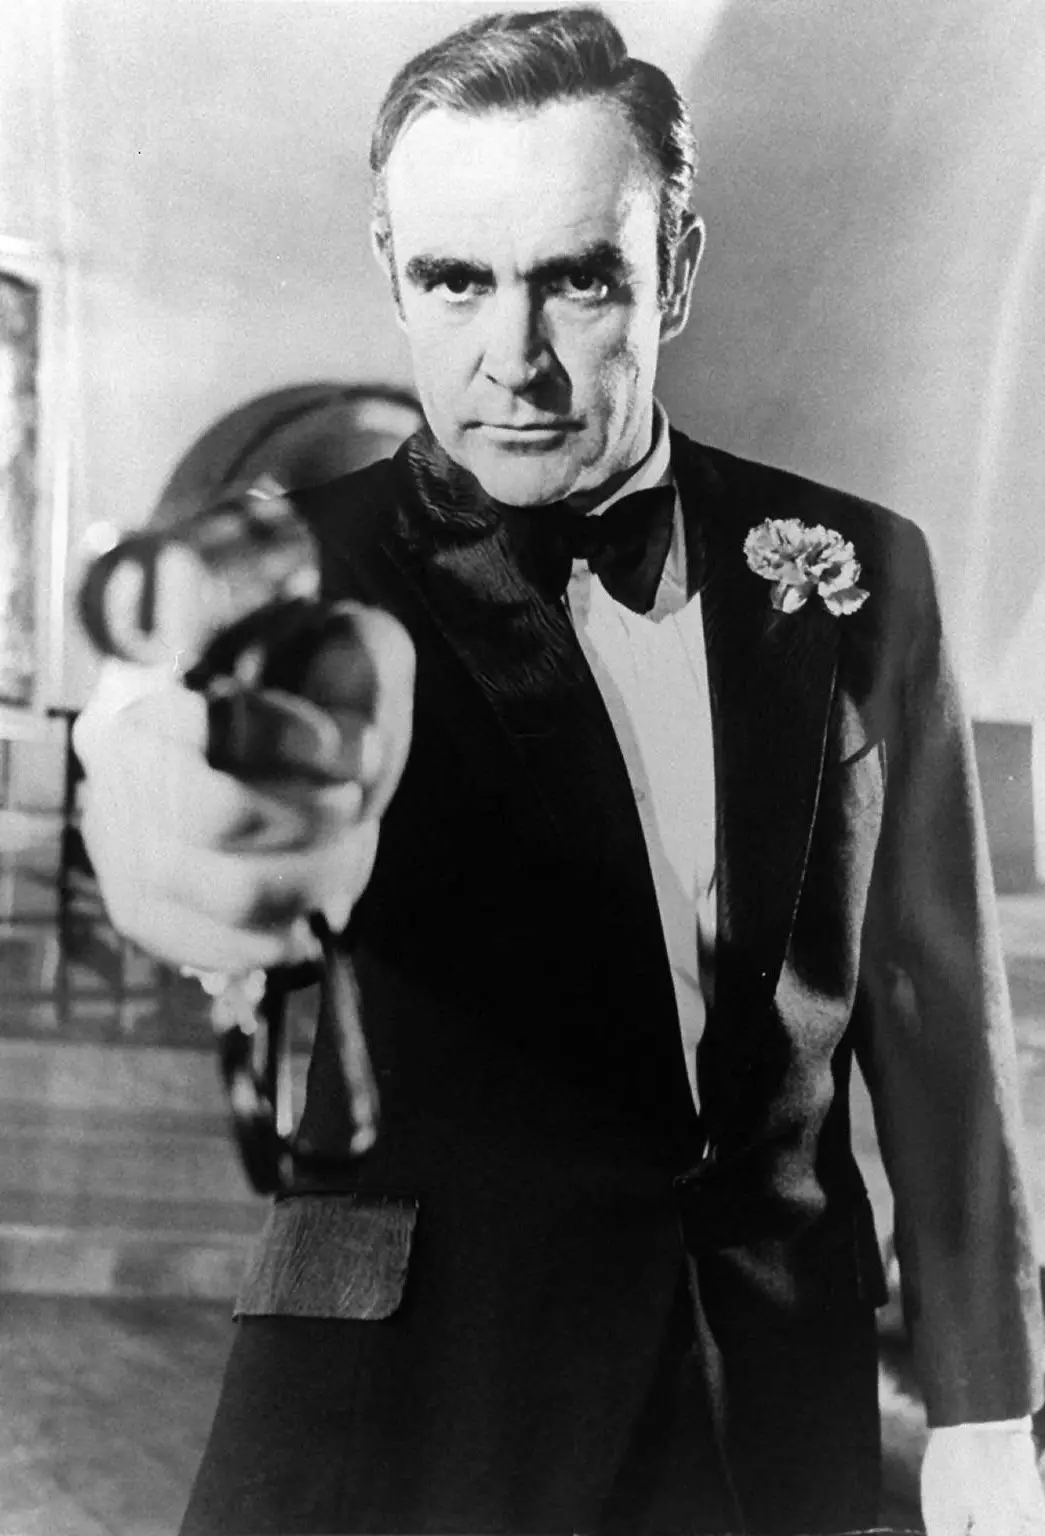 Sean Connery as Bond. Eon Productions